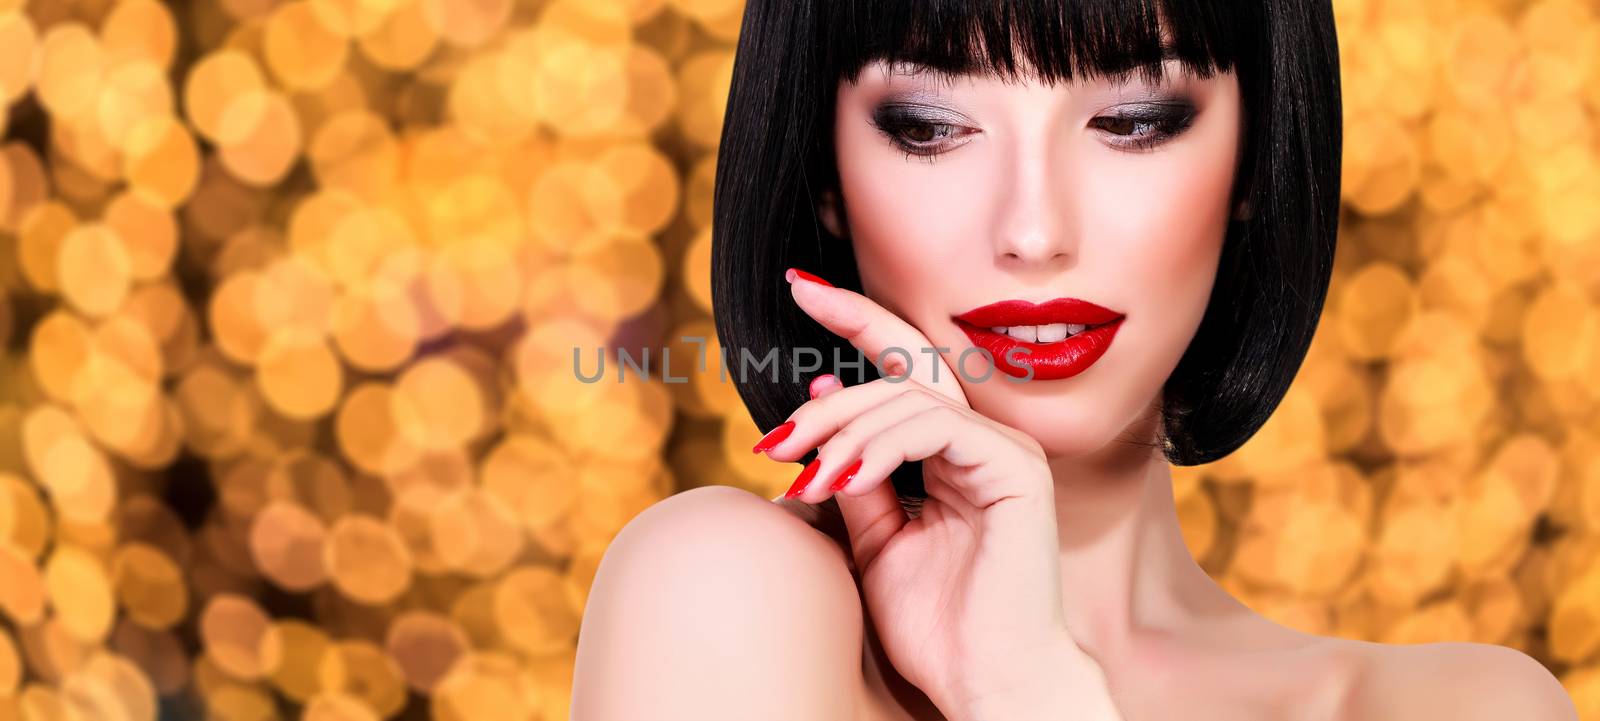 Pretty woman against an abstract background with blurred lights